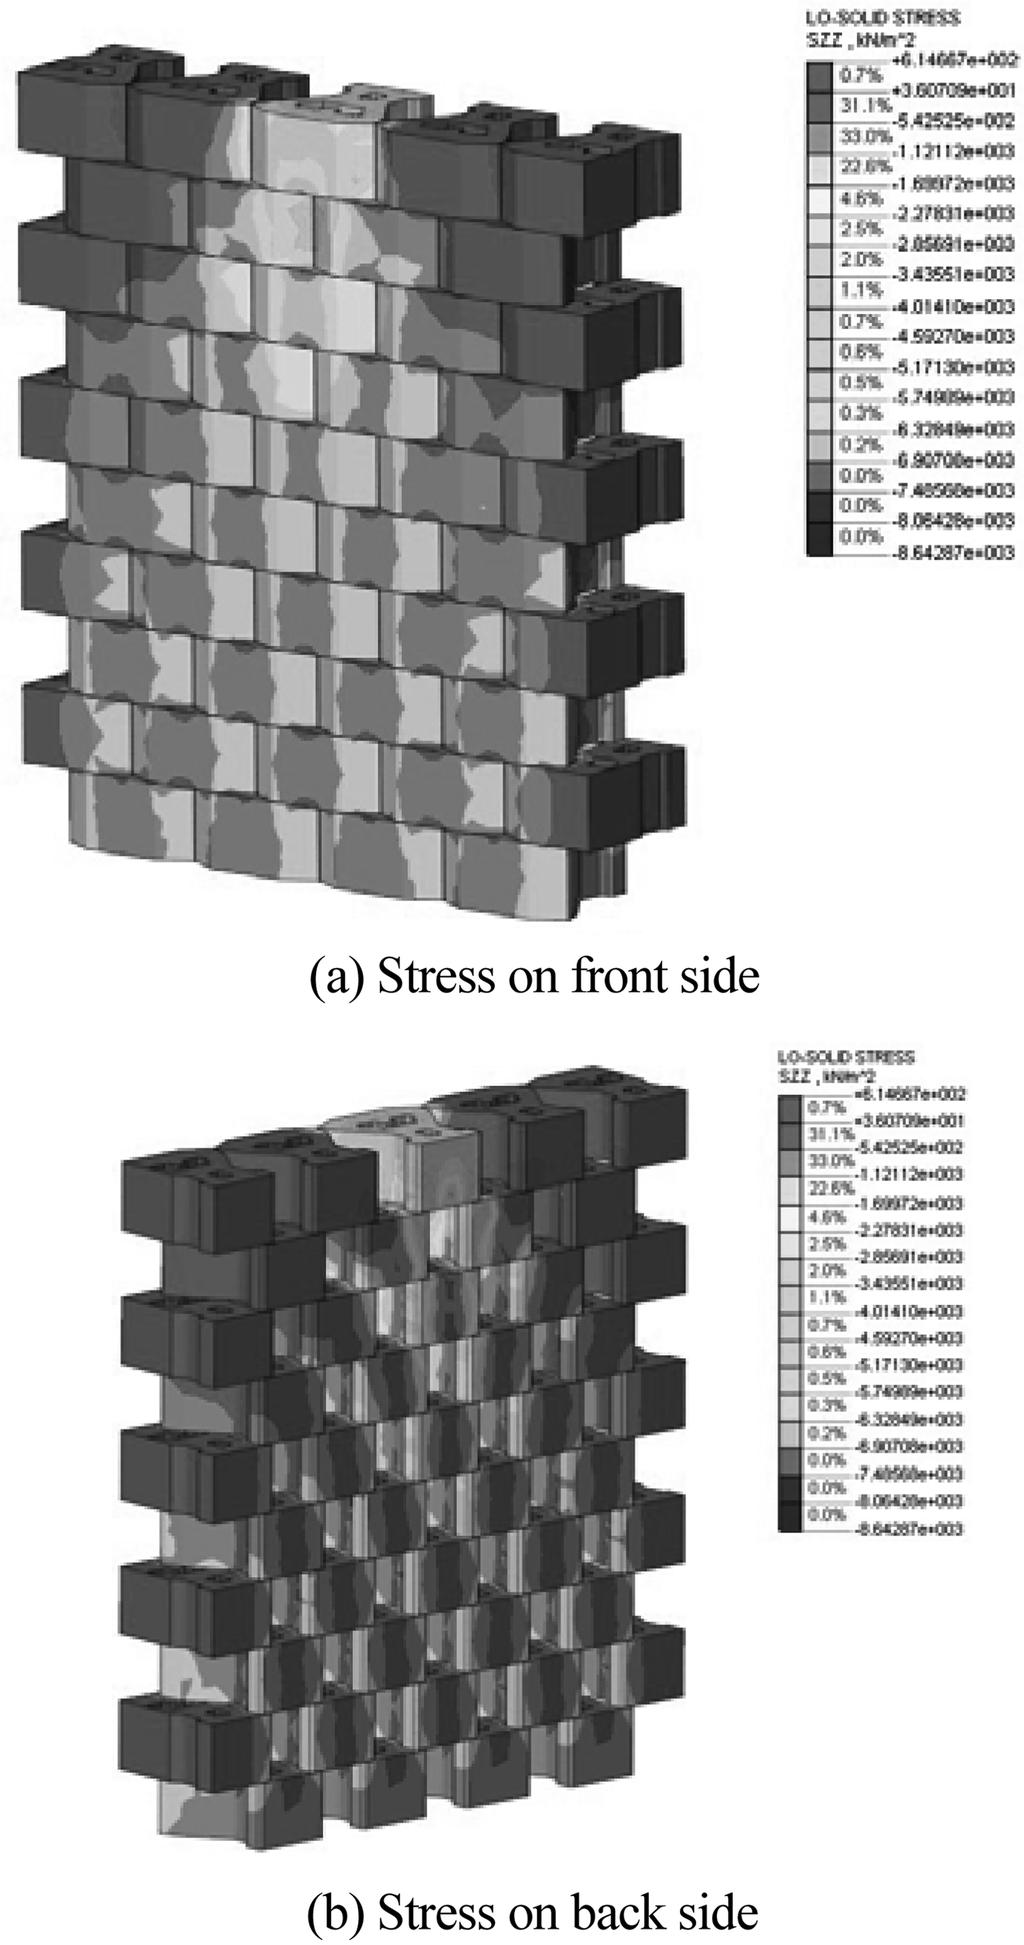 33 kn introduced to the segmental vertical facing considered in this study exceeded allowable bending compressive stress (9.